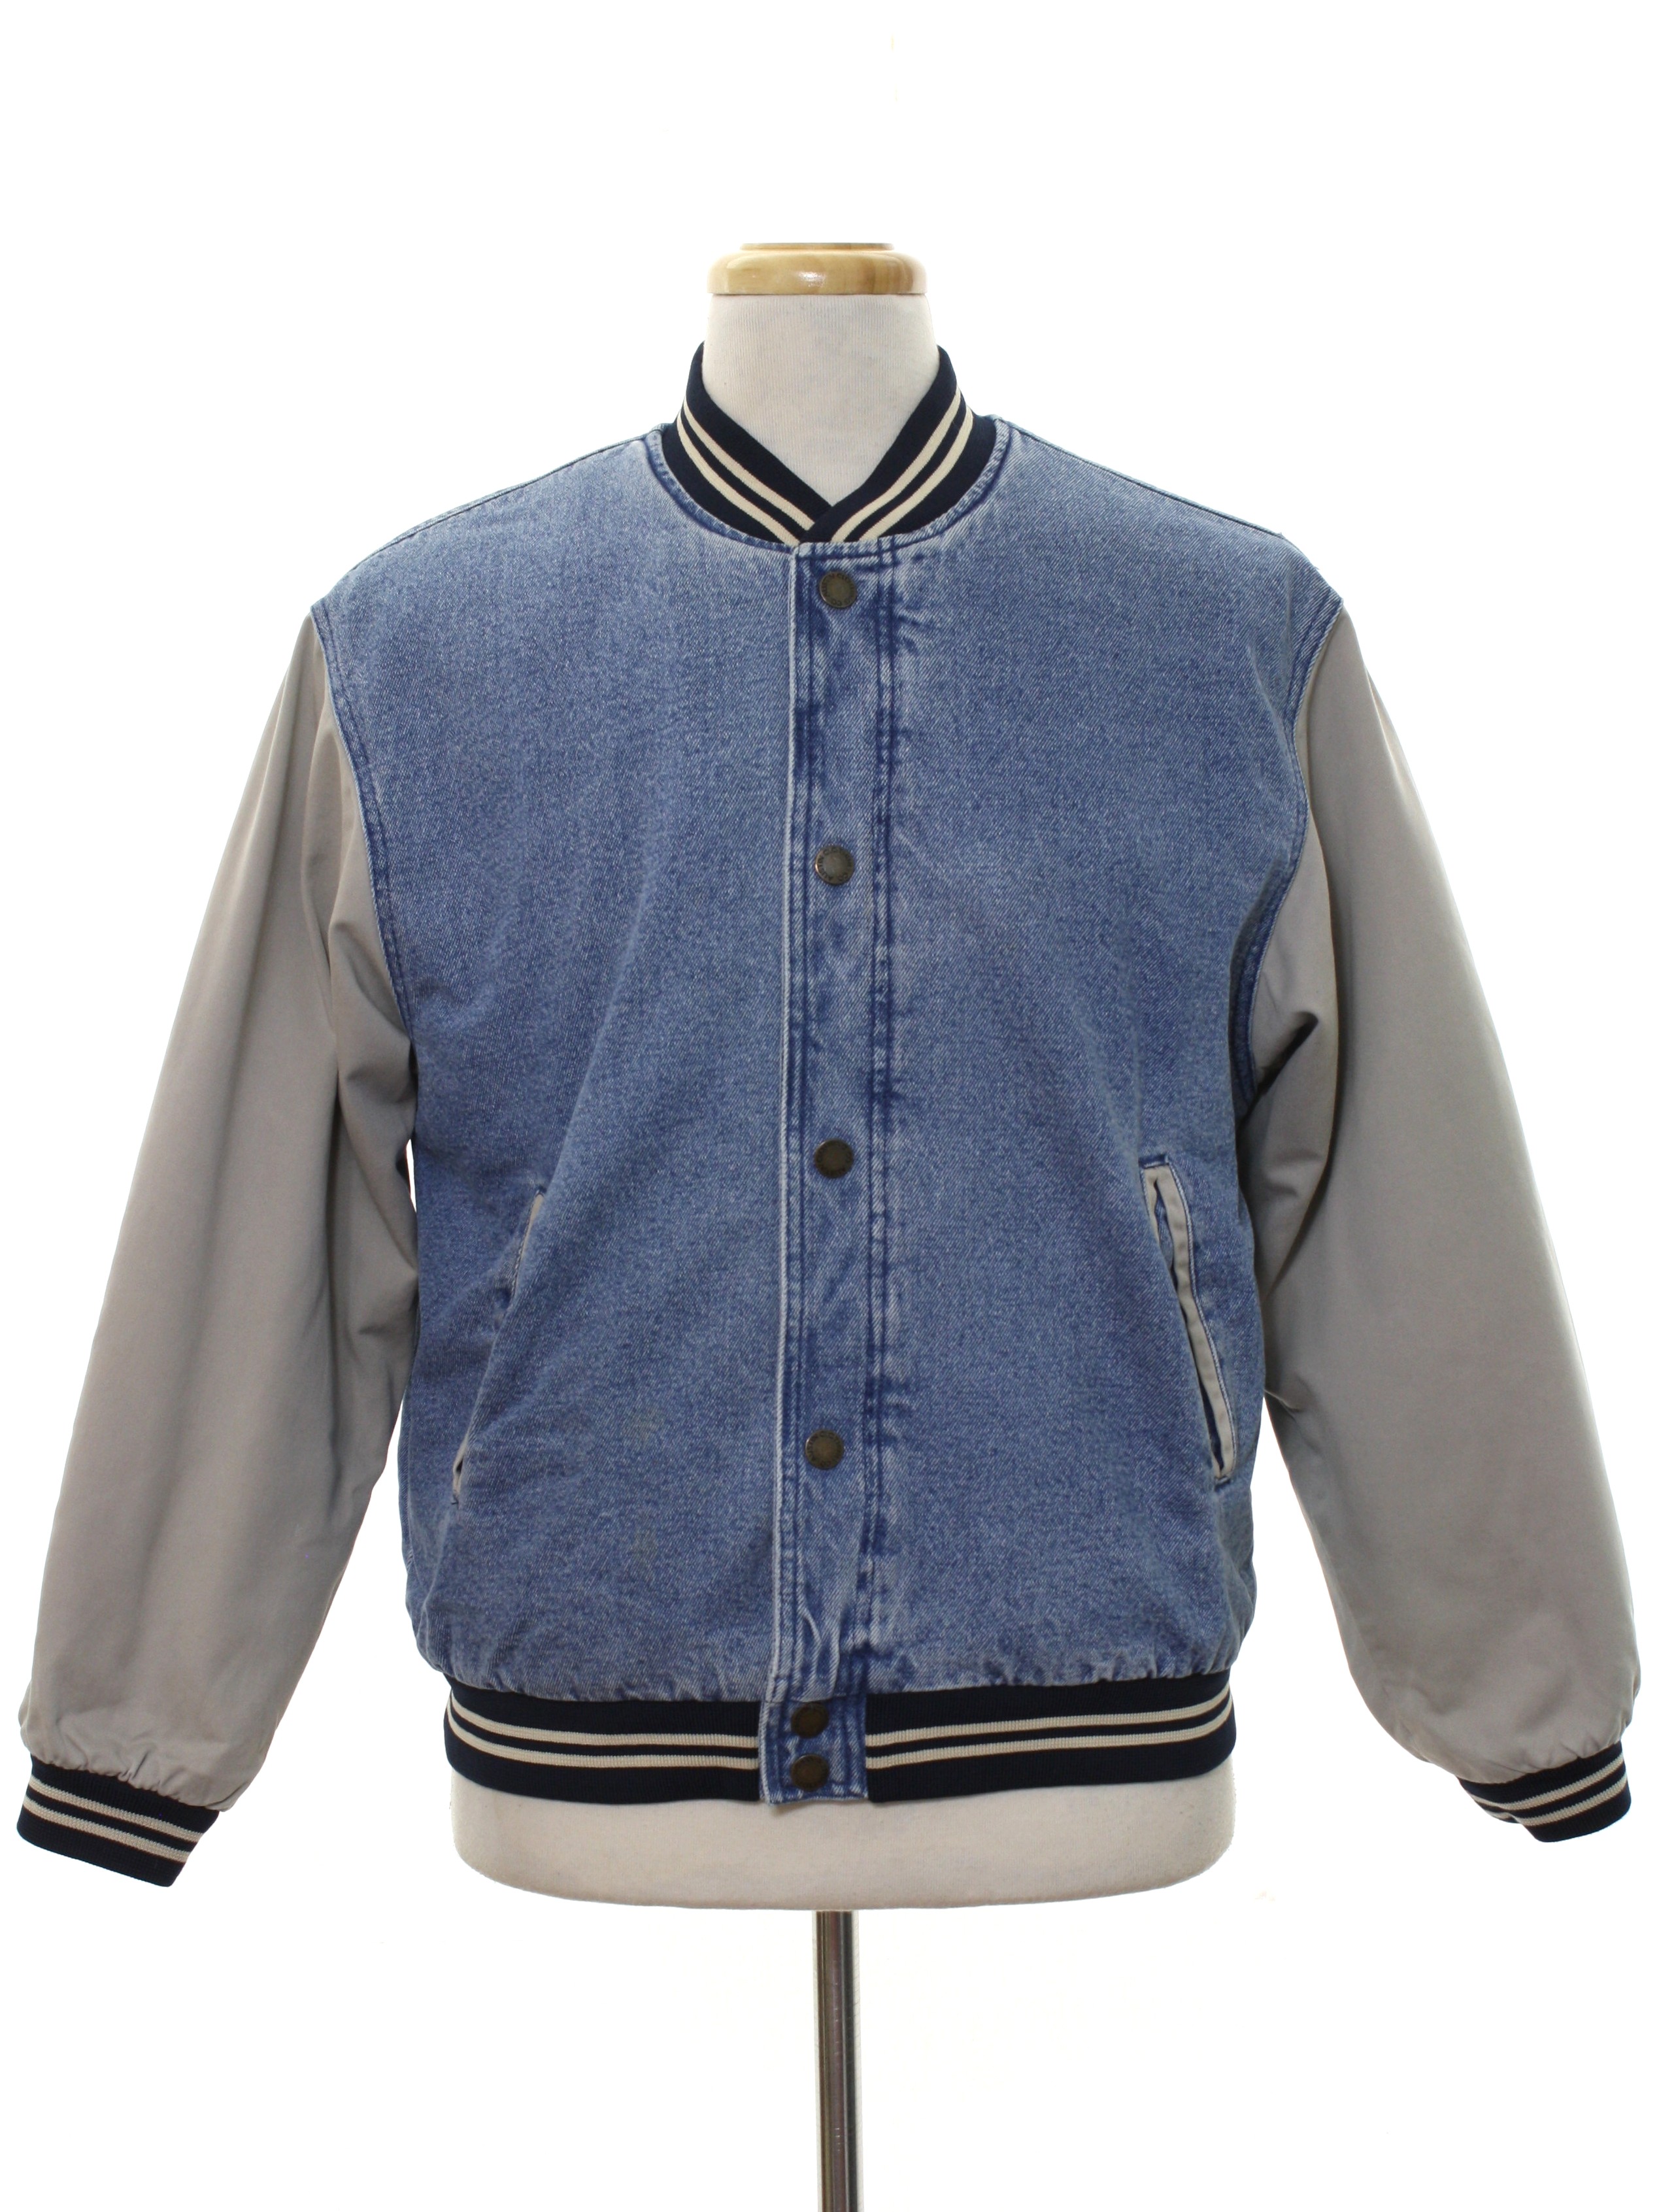 Retro 90's Jacket: 90s or newer -Austin- Mens or Boys light blue and ...